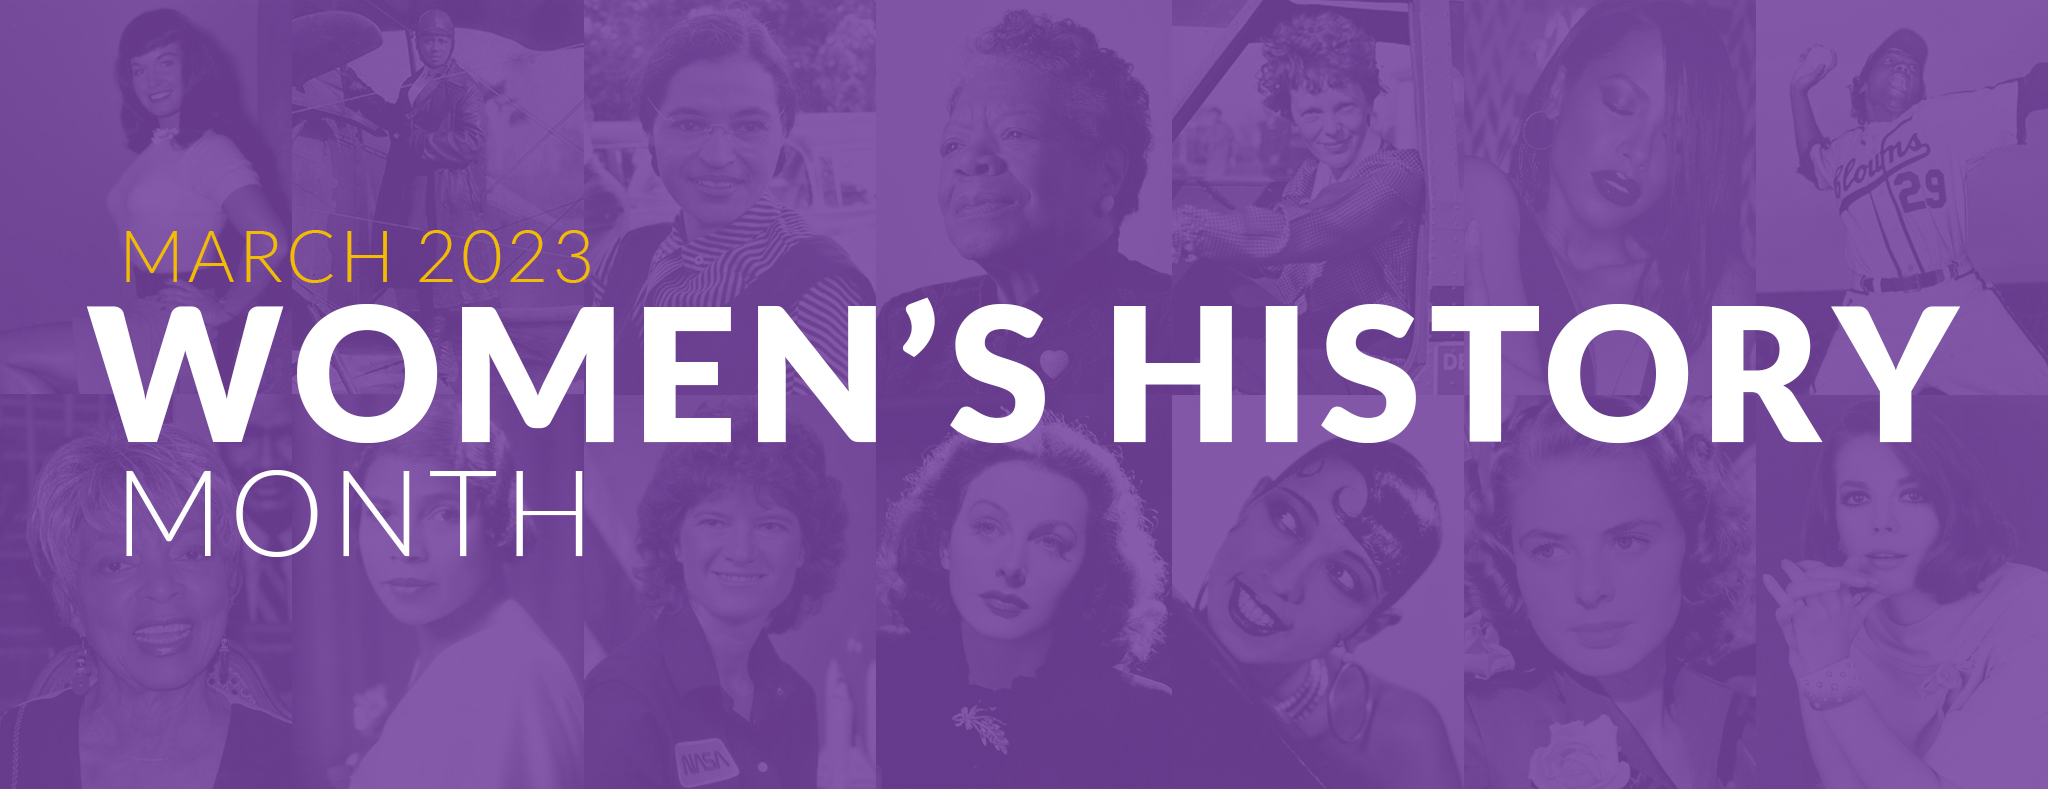 March 2023: Women's History Month